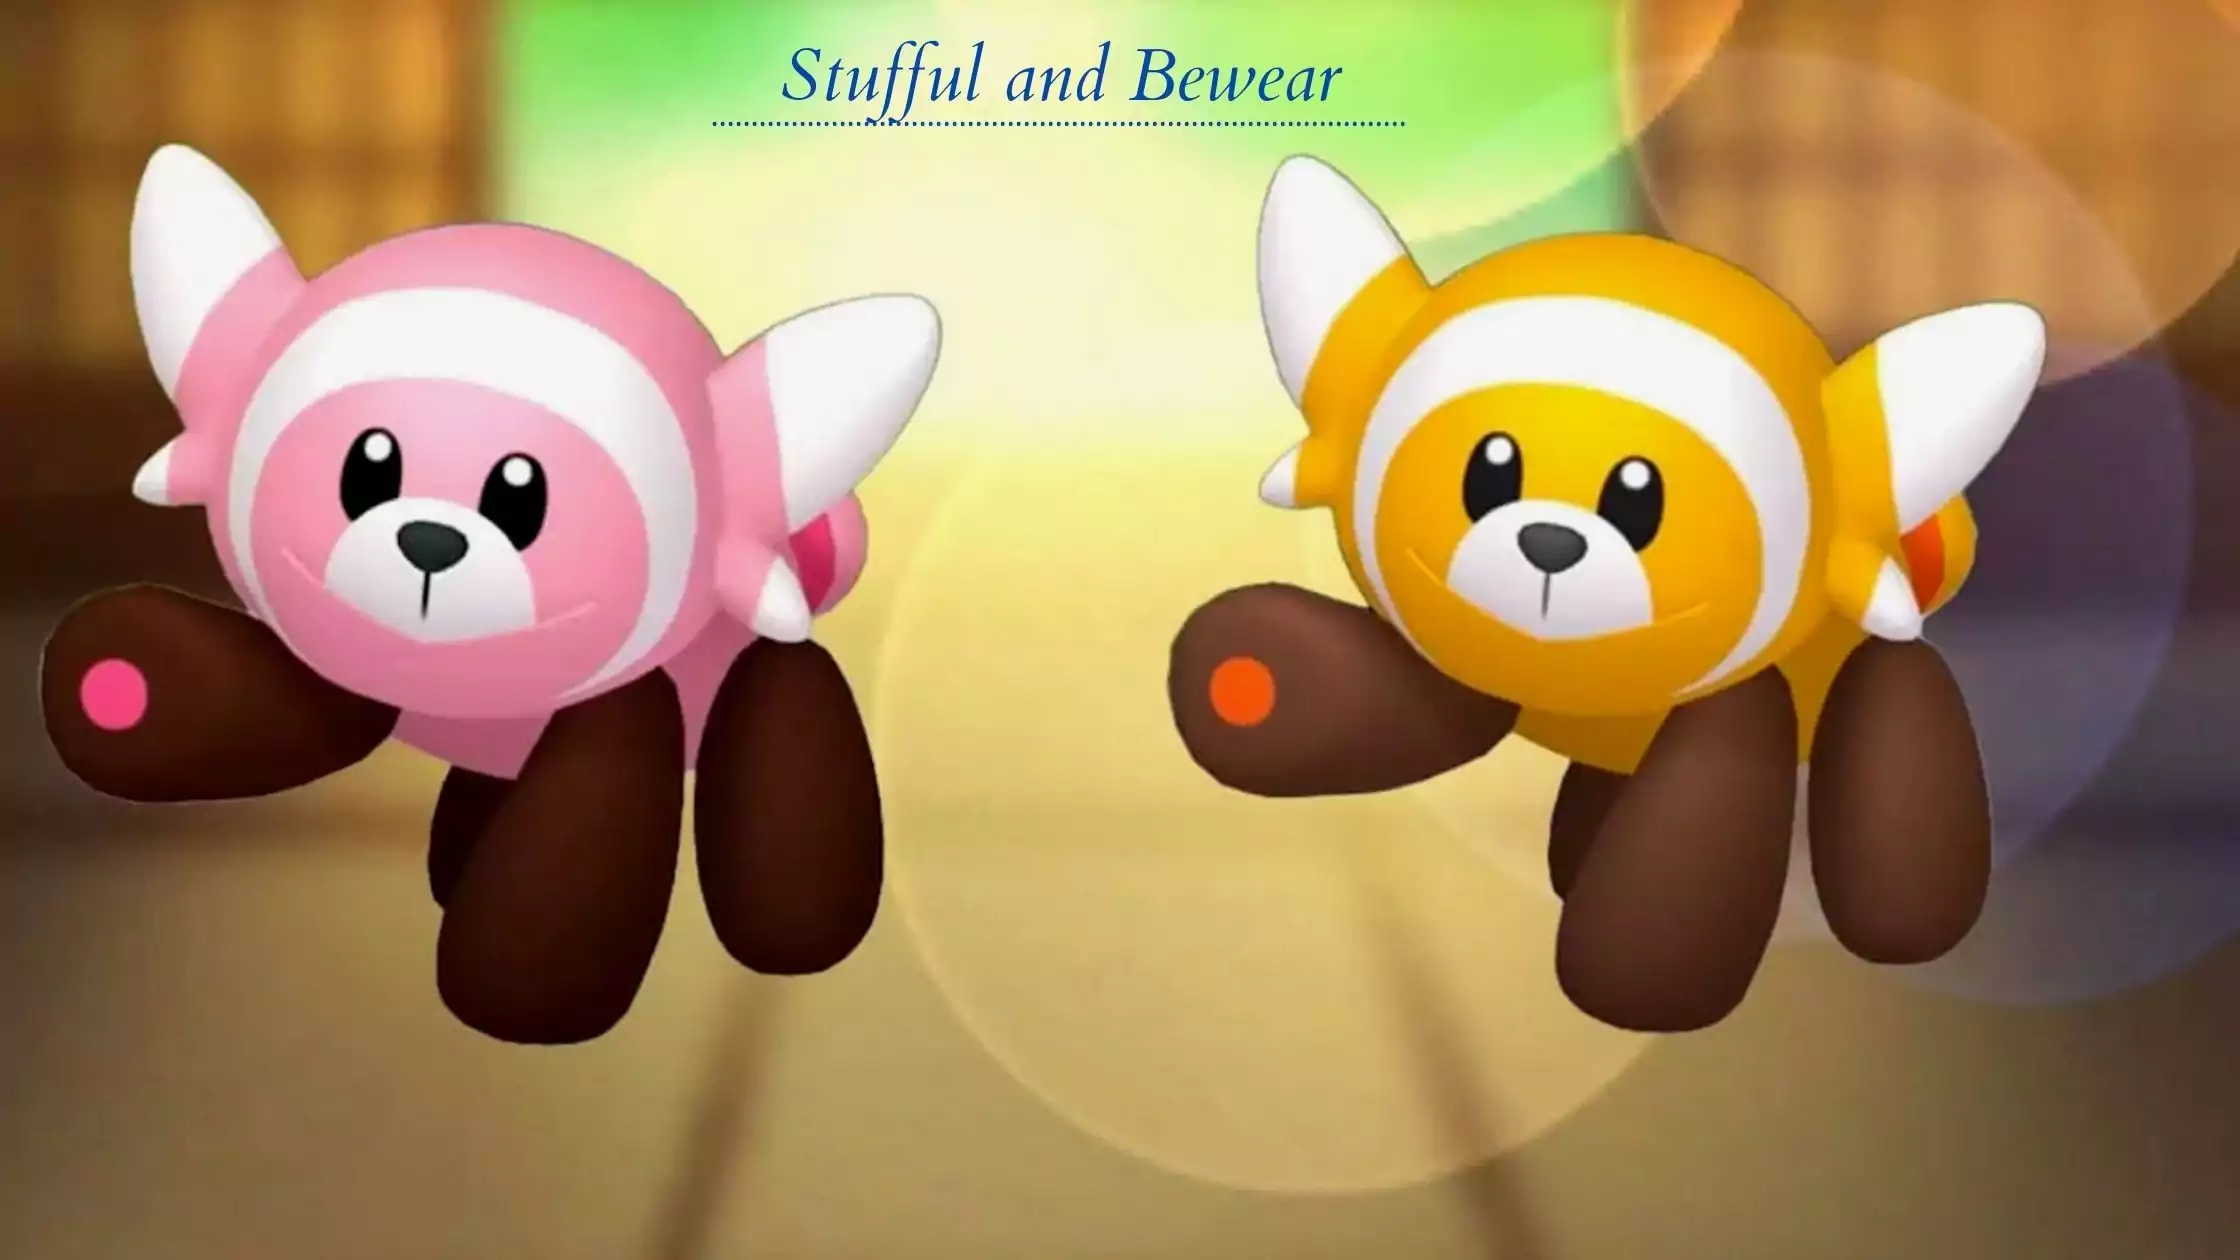 Stufful and Bewear make their Pokémon Go debut for April’s Community Day event